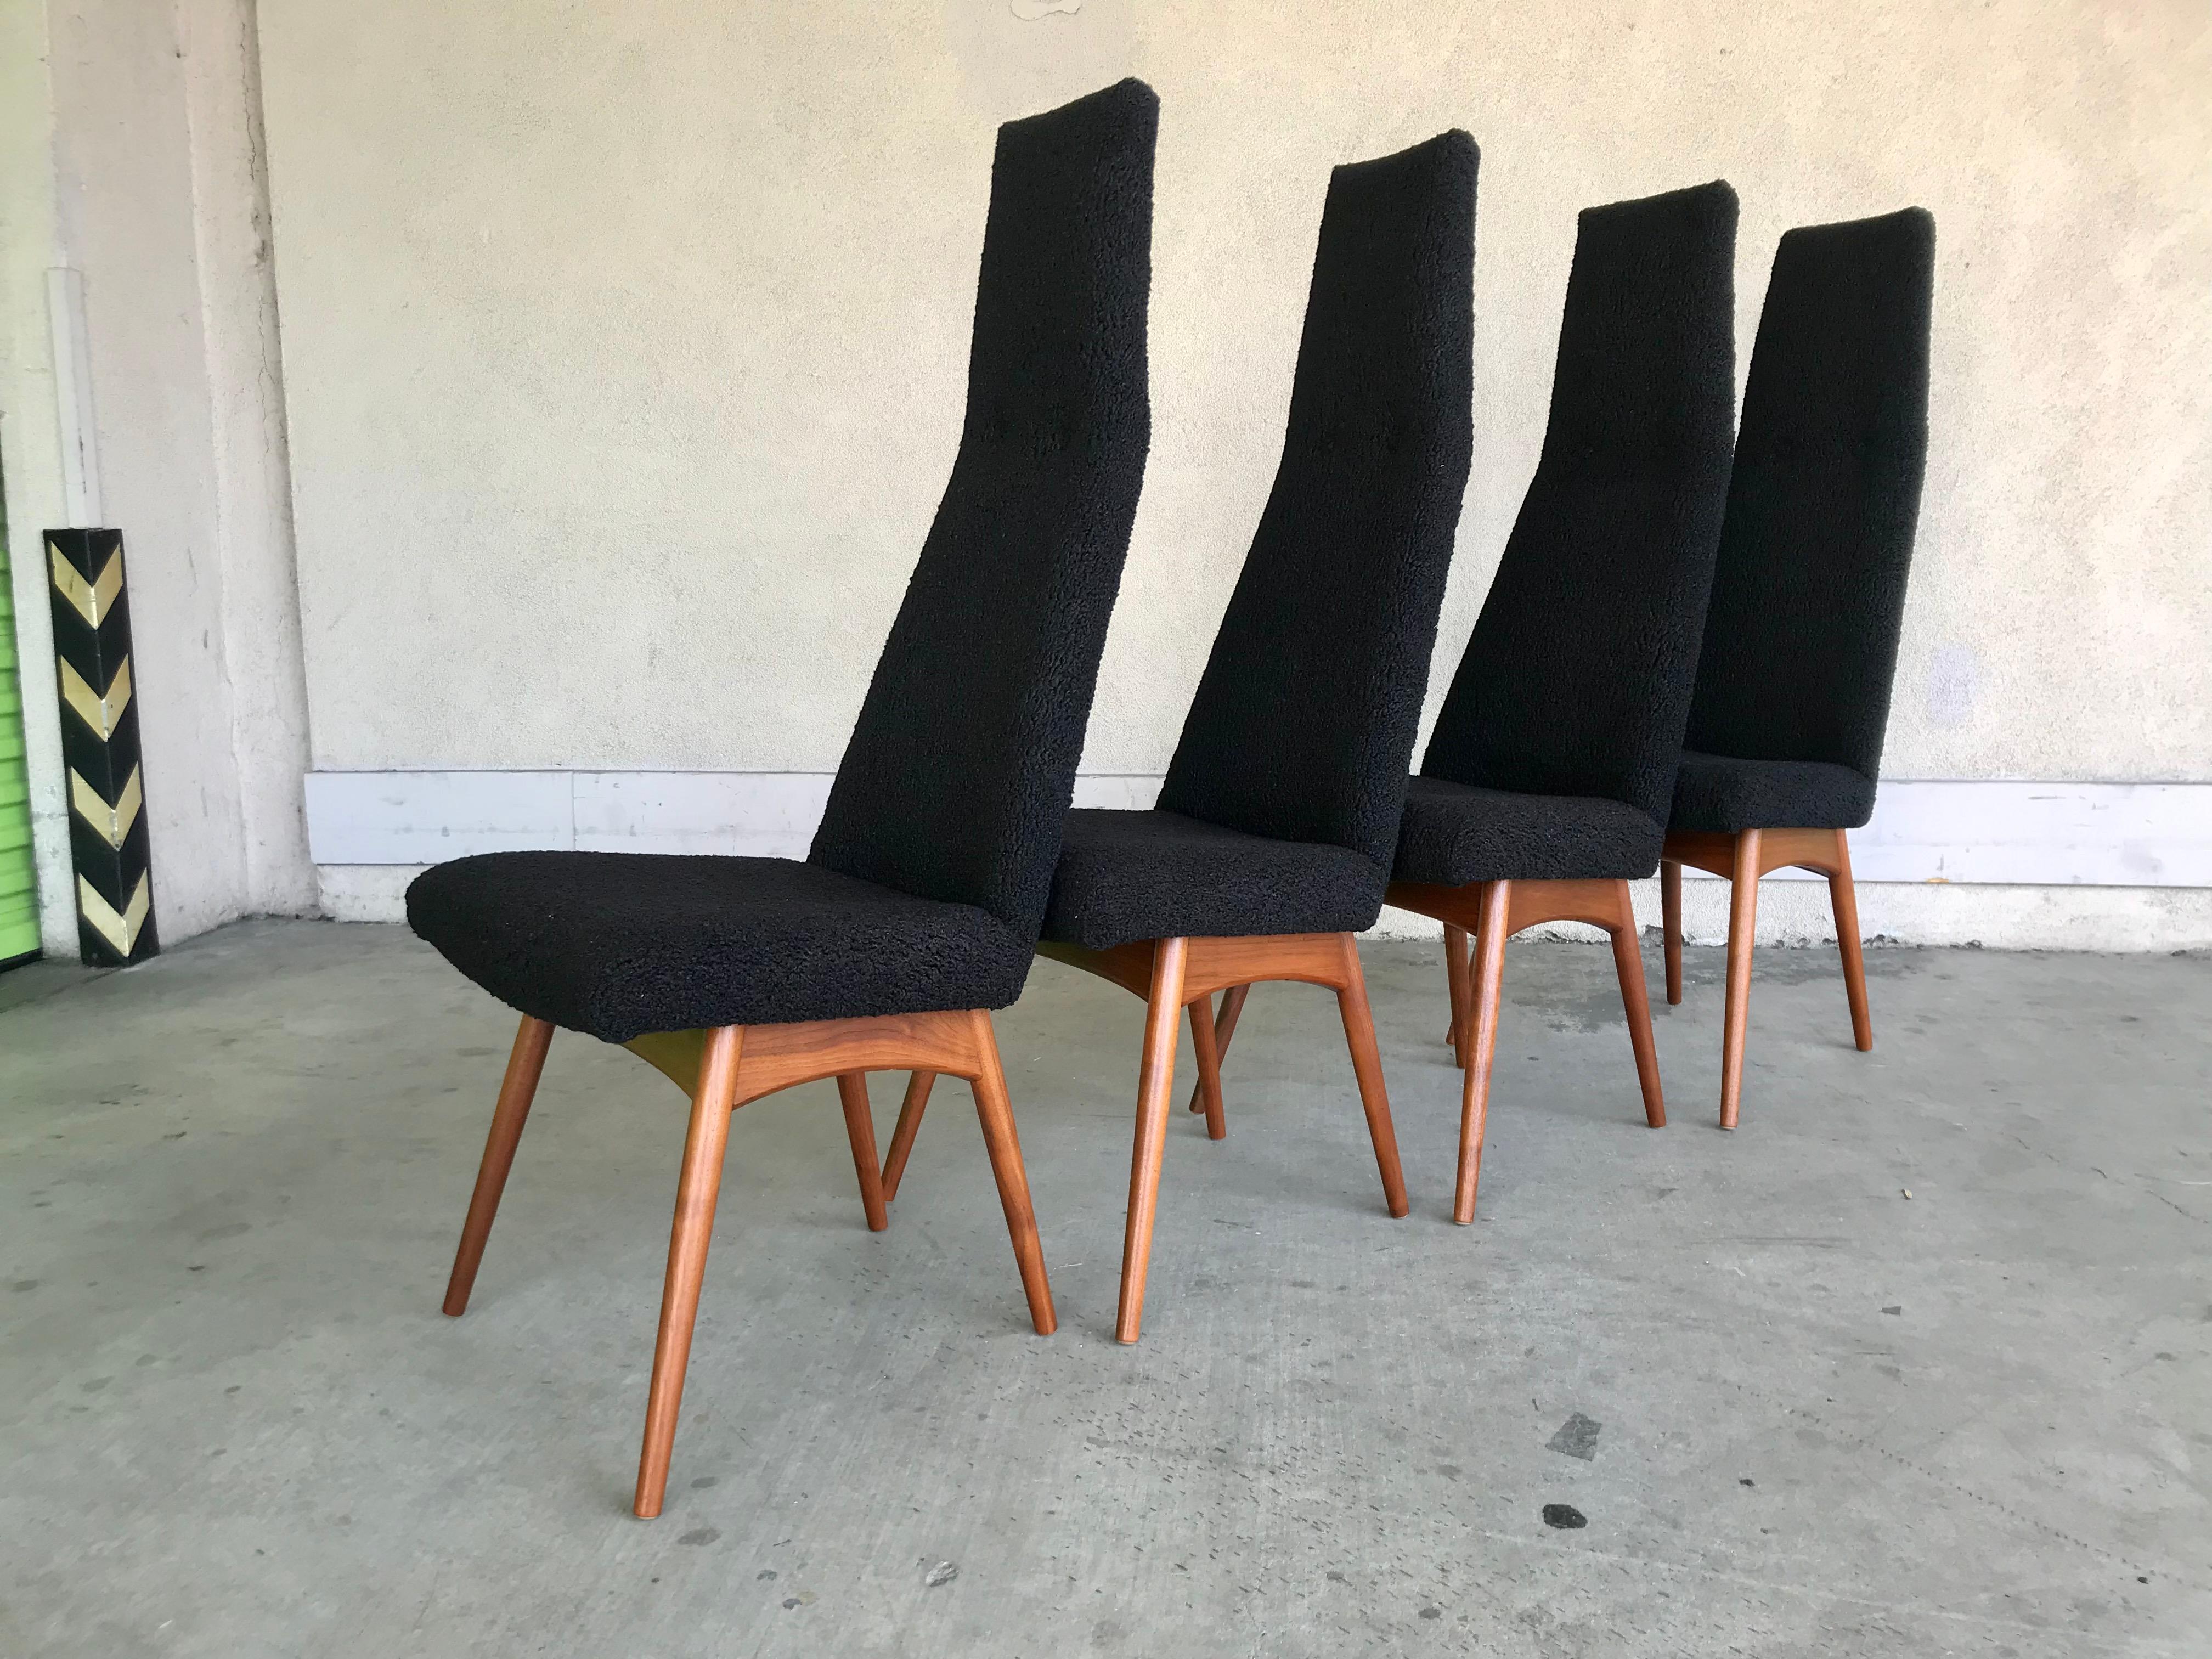 Classic vintage modern design.
Restored with a nubby black faux sheepskin fabric.
Nice solid American black walnut base.
Great for a breakfast nook, random seating or add with other sets.